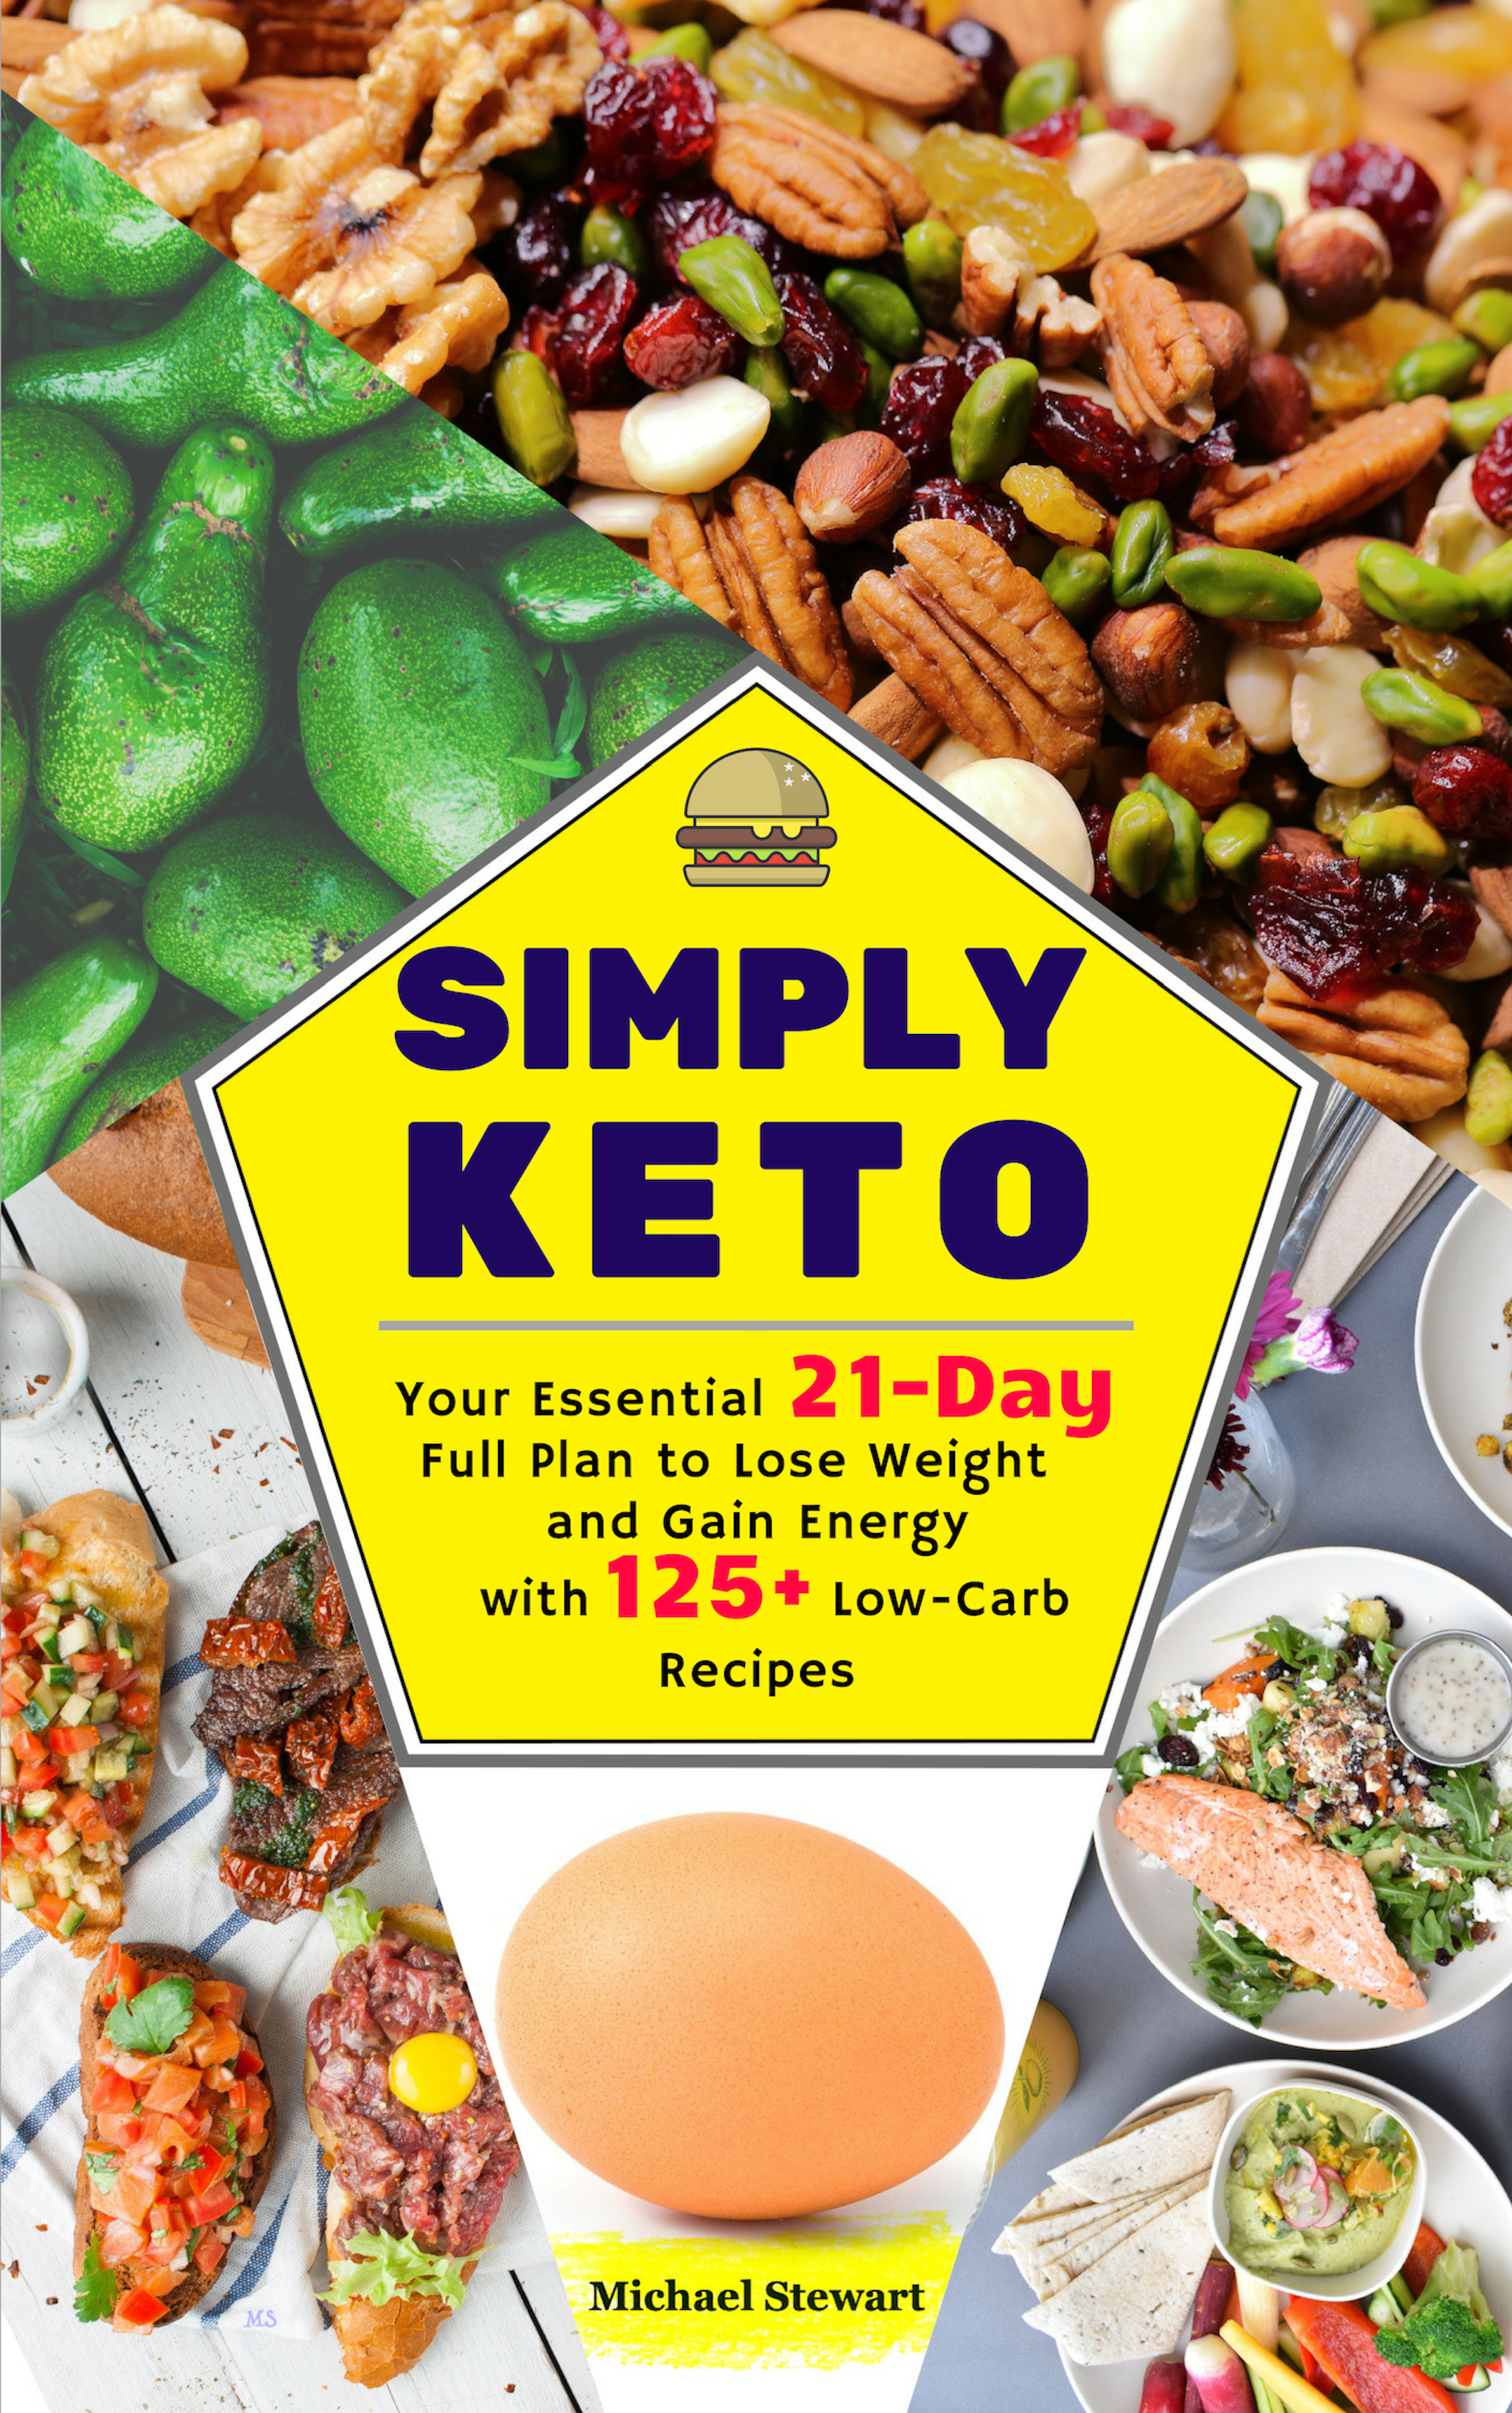 FREE: Simply Keto: Your Essential 21-Day Full Plan to Lose Weight and Gain Energy, with 125+ Low-Carb Recipes by michael